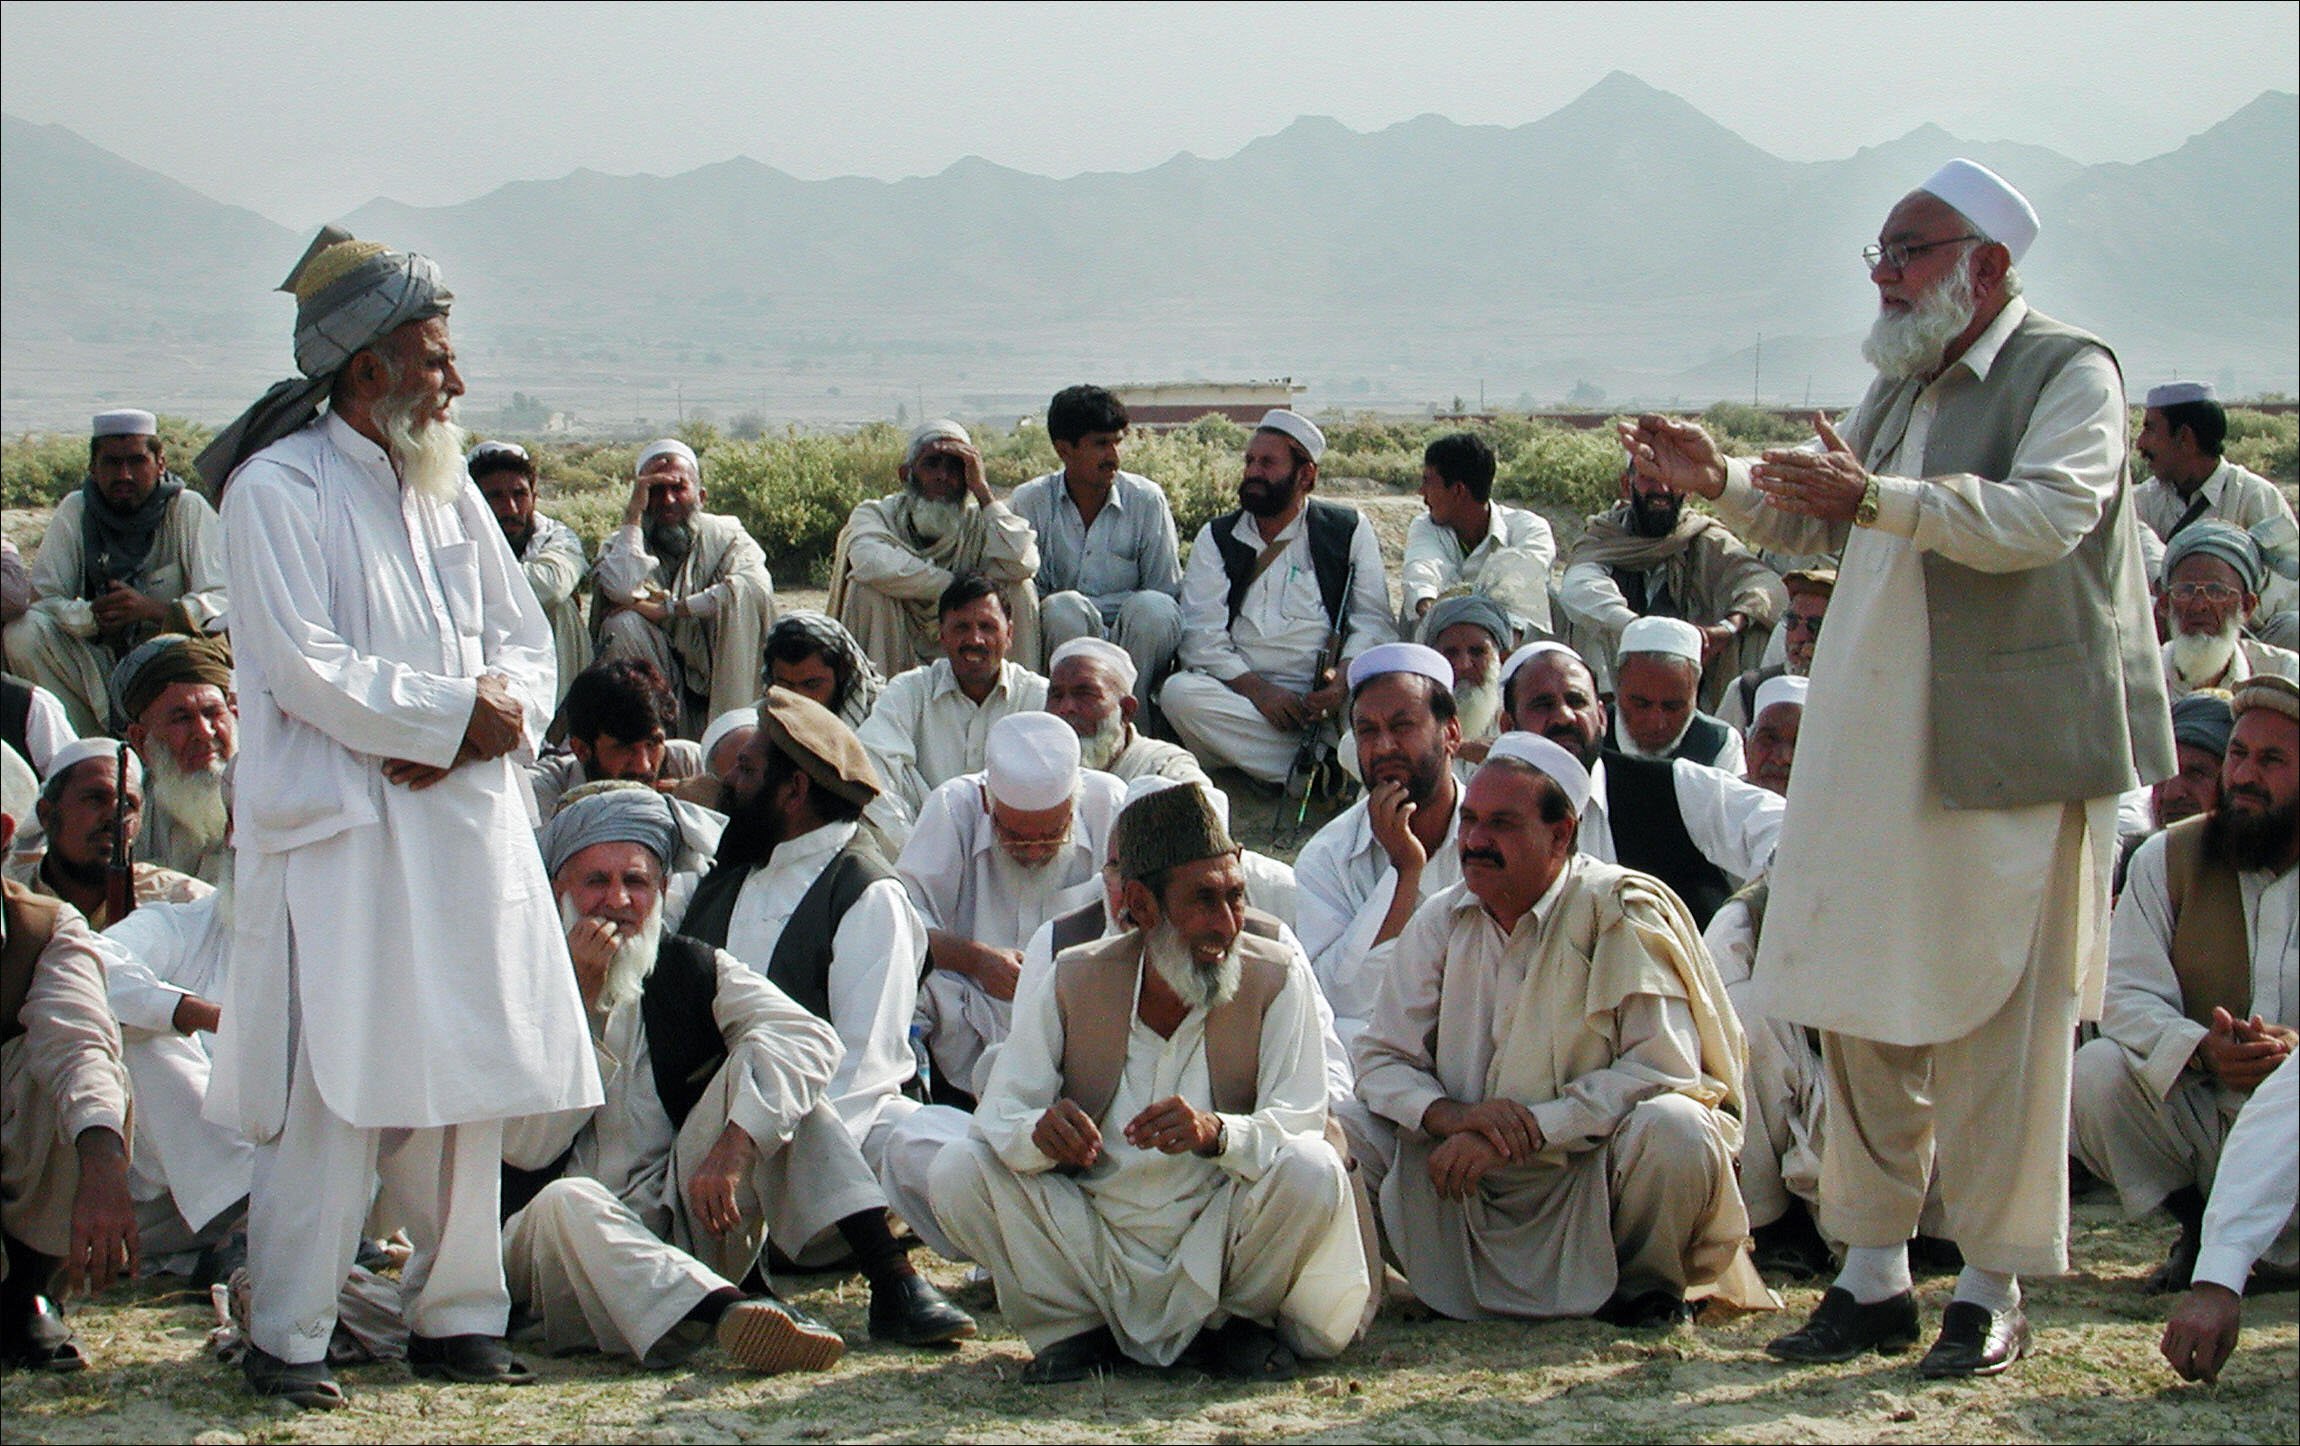 govt forms jirga to end tribal dispute in kurram district